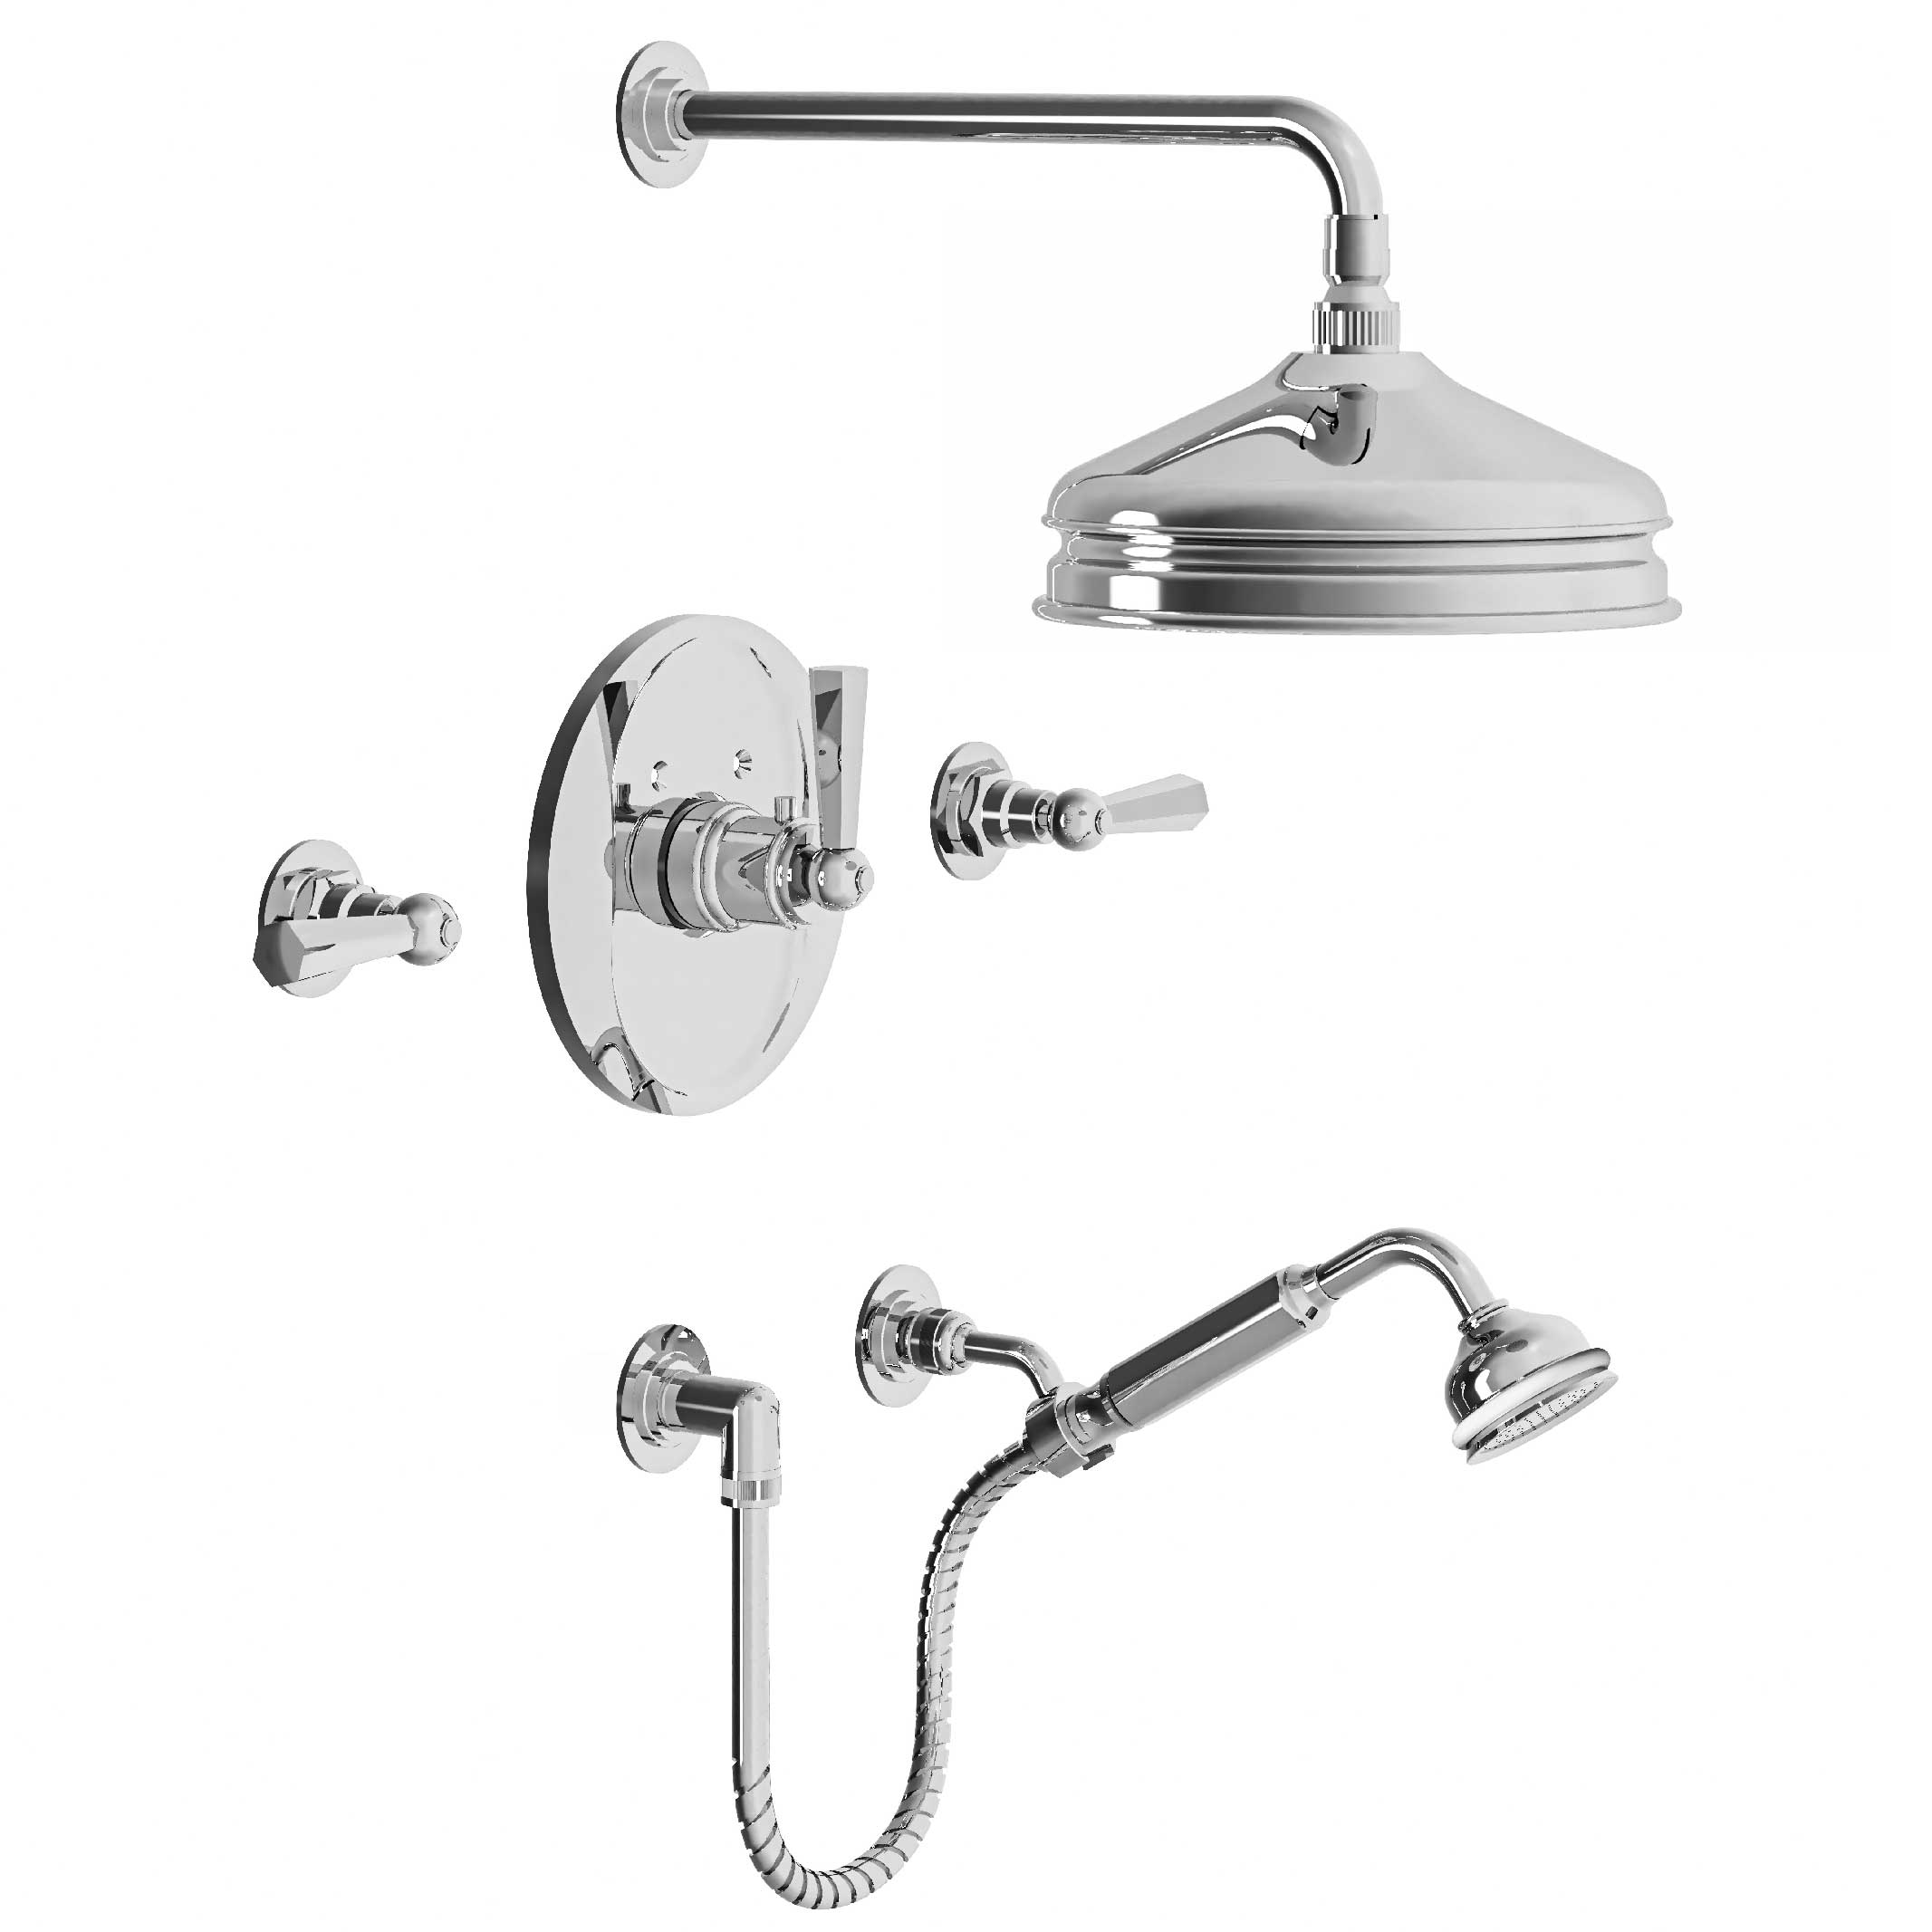 M39-2308T1 Thermostatic shower mixer package